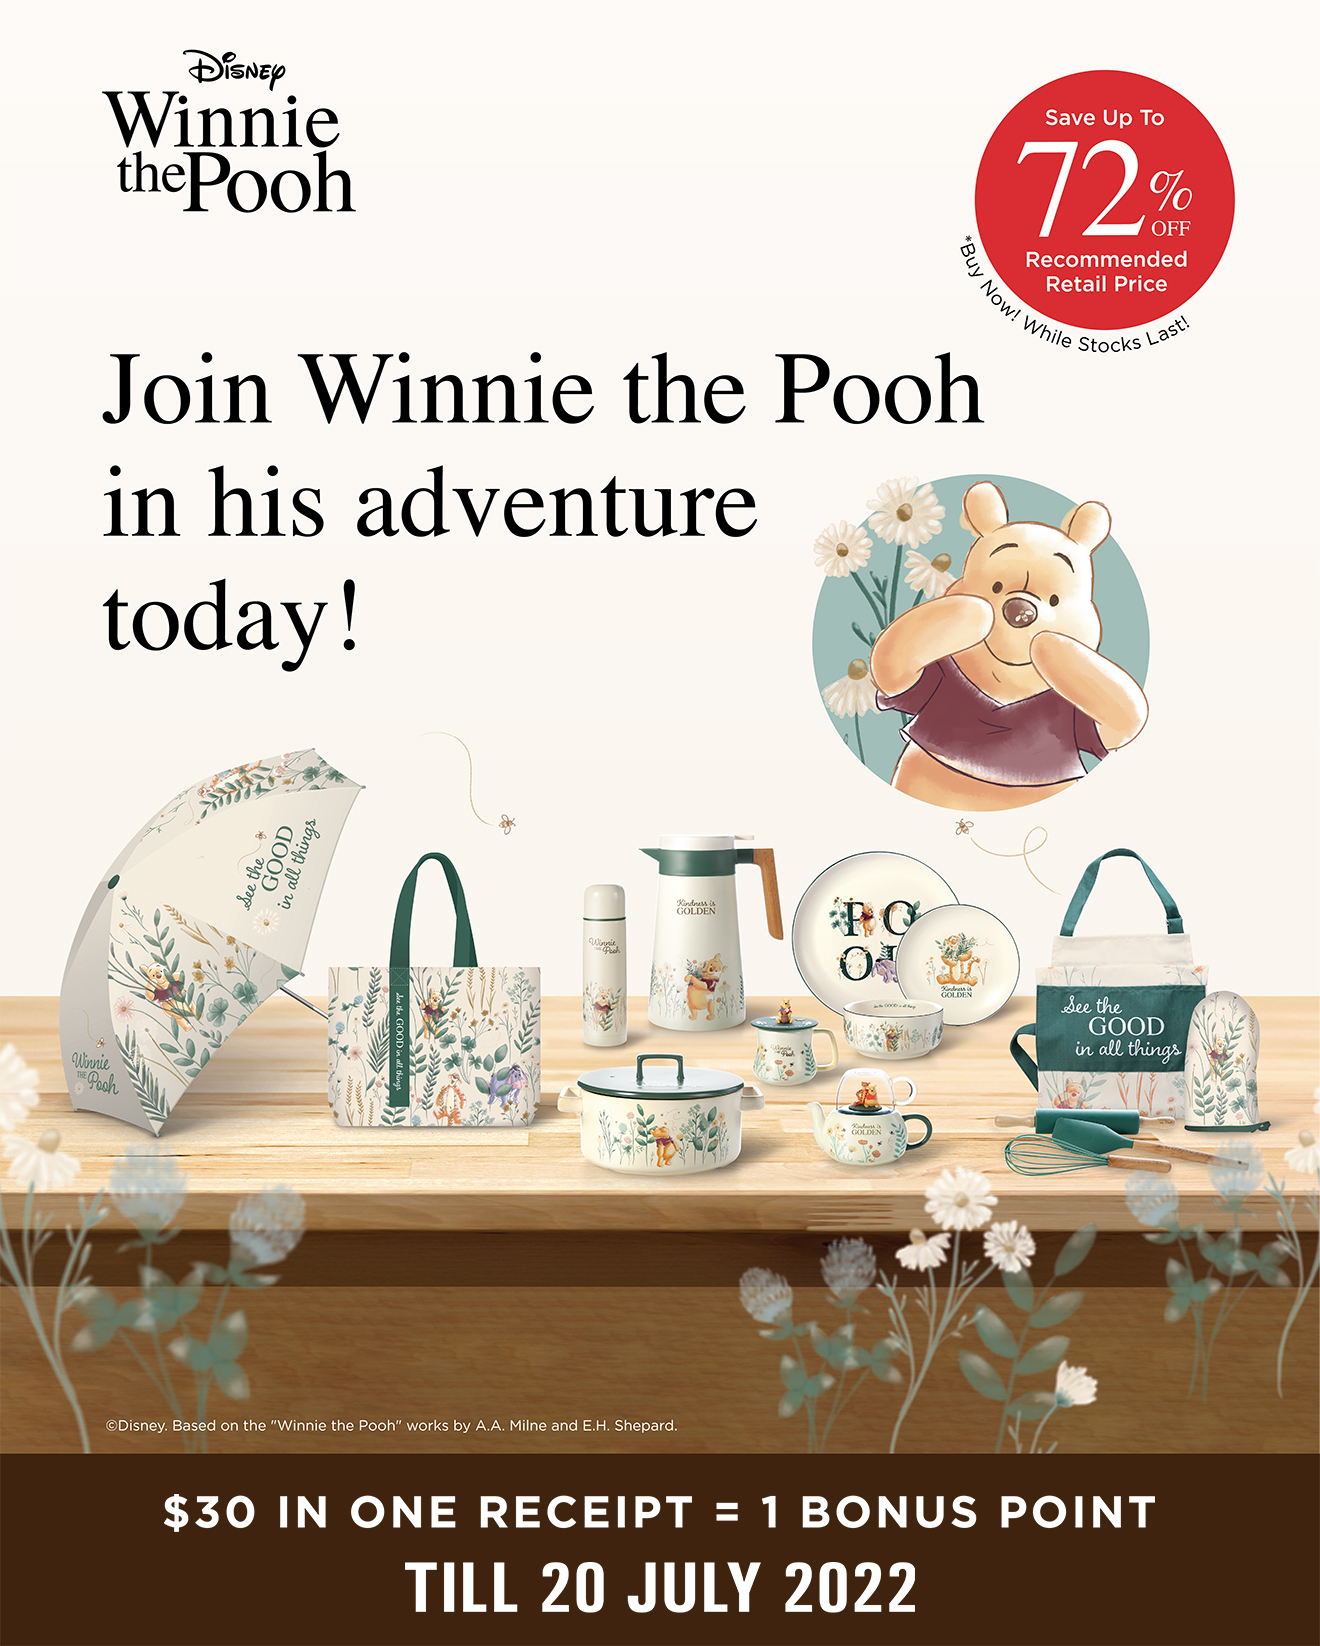 Exclusive Disney Winnie the Pooh Collection for FairPrice Loyalty Programme